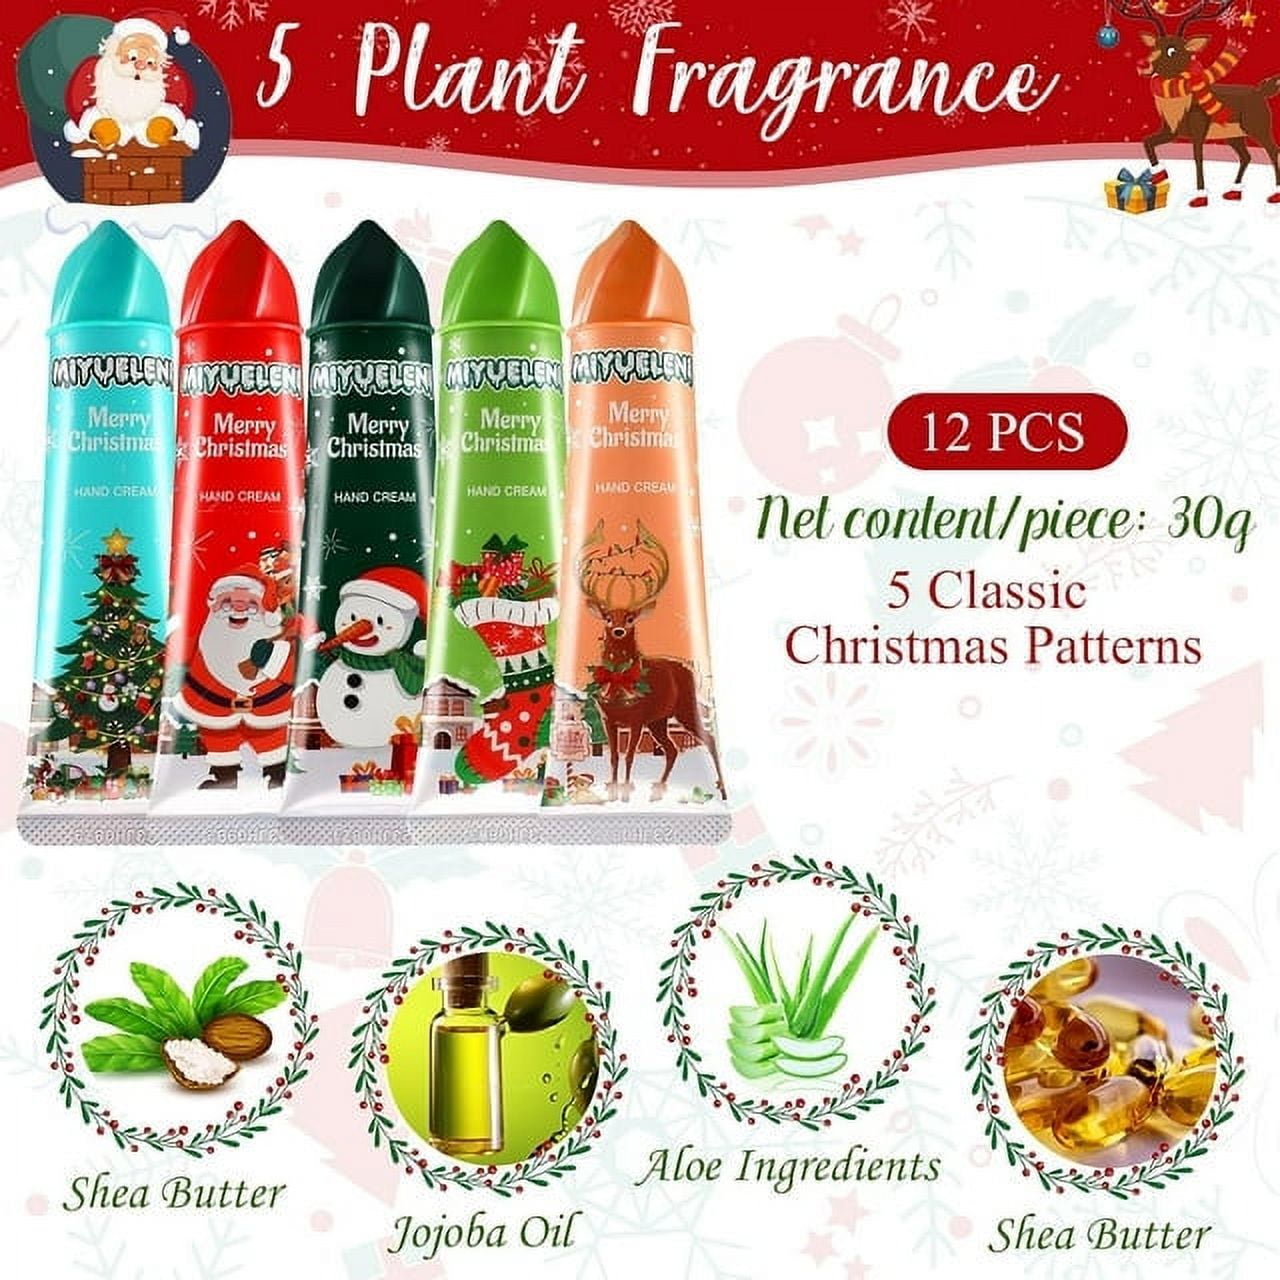  10 Pack Hand Cream Christmas Gifts Sets for Women,Stocking  Stuffers for Adults,Moisturizing Hand Cream with Shea Butter Aloe,Hand  Cream for Dry Hands,Christmas Gift for Girls Wife Mom Her Grandma 